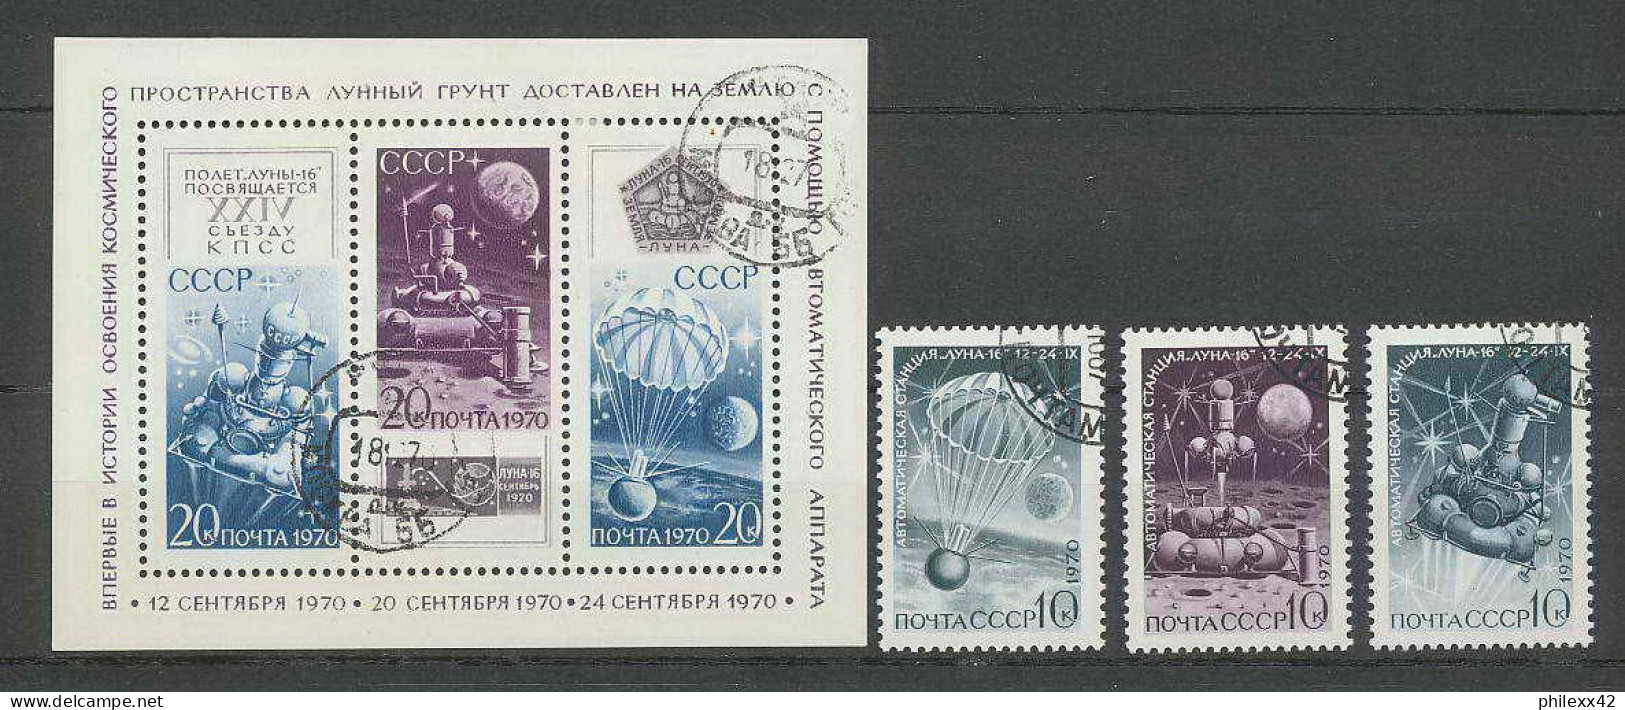 1396/ Espace (space) Neuf ** MNH Russie (Russia Urss USSR) 3787/89 + Bloc 66 + USED - Rusland En USSR